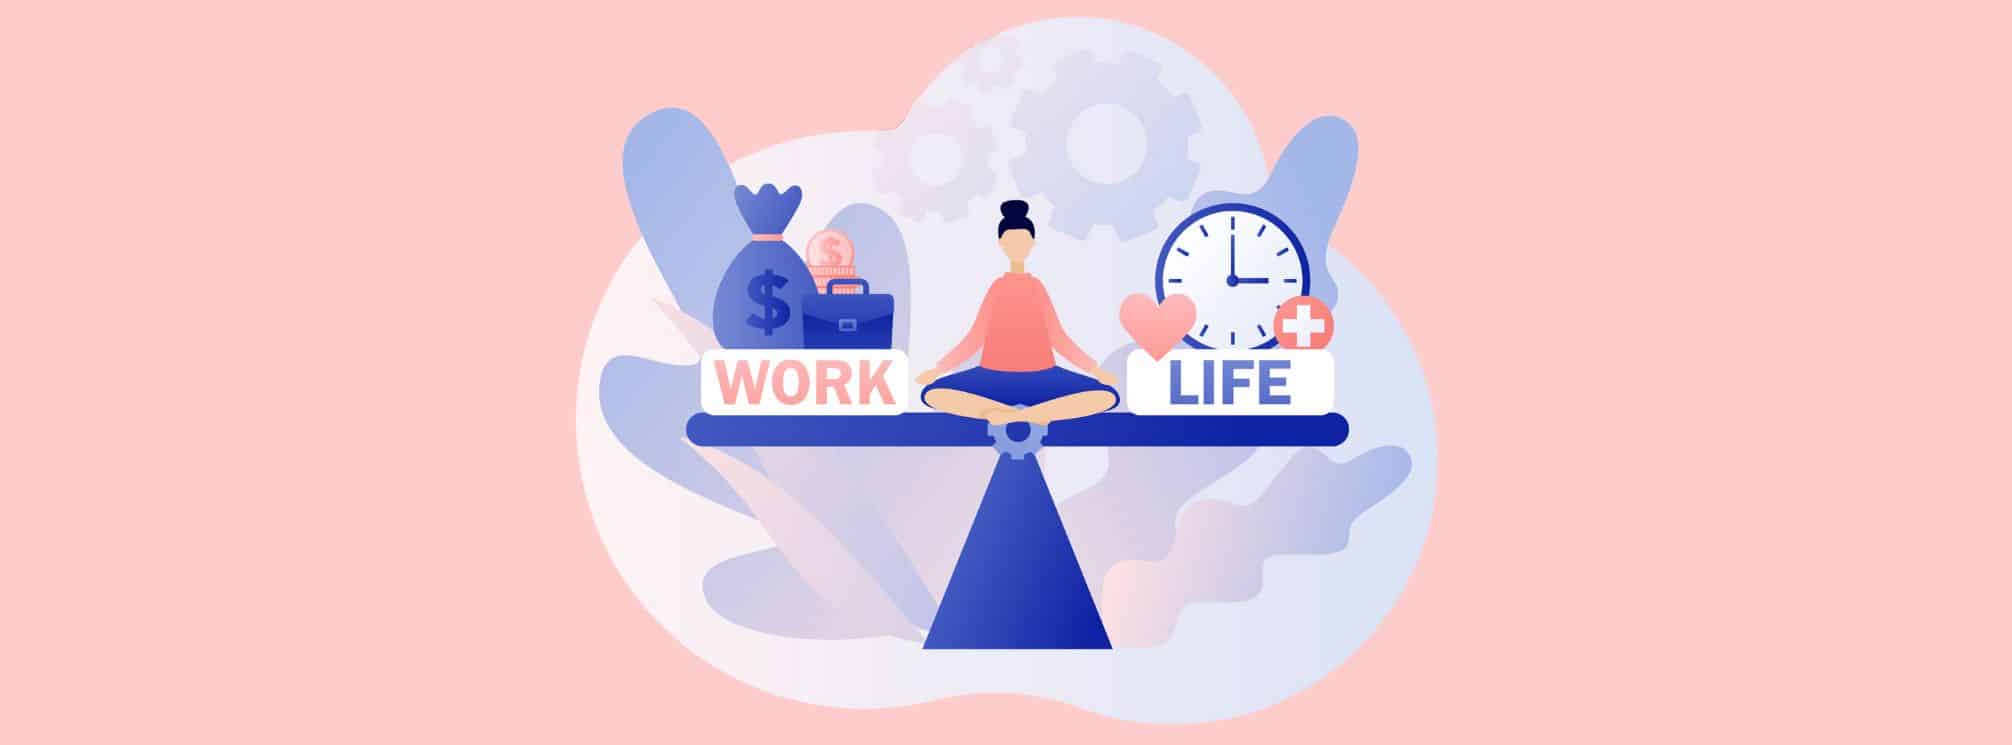 flat art illustration of a person sitting in the middle of a scale, balancing work and life, to represent work-life balance.